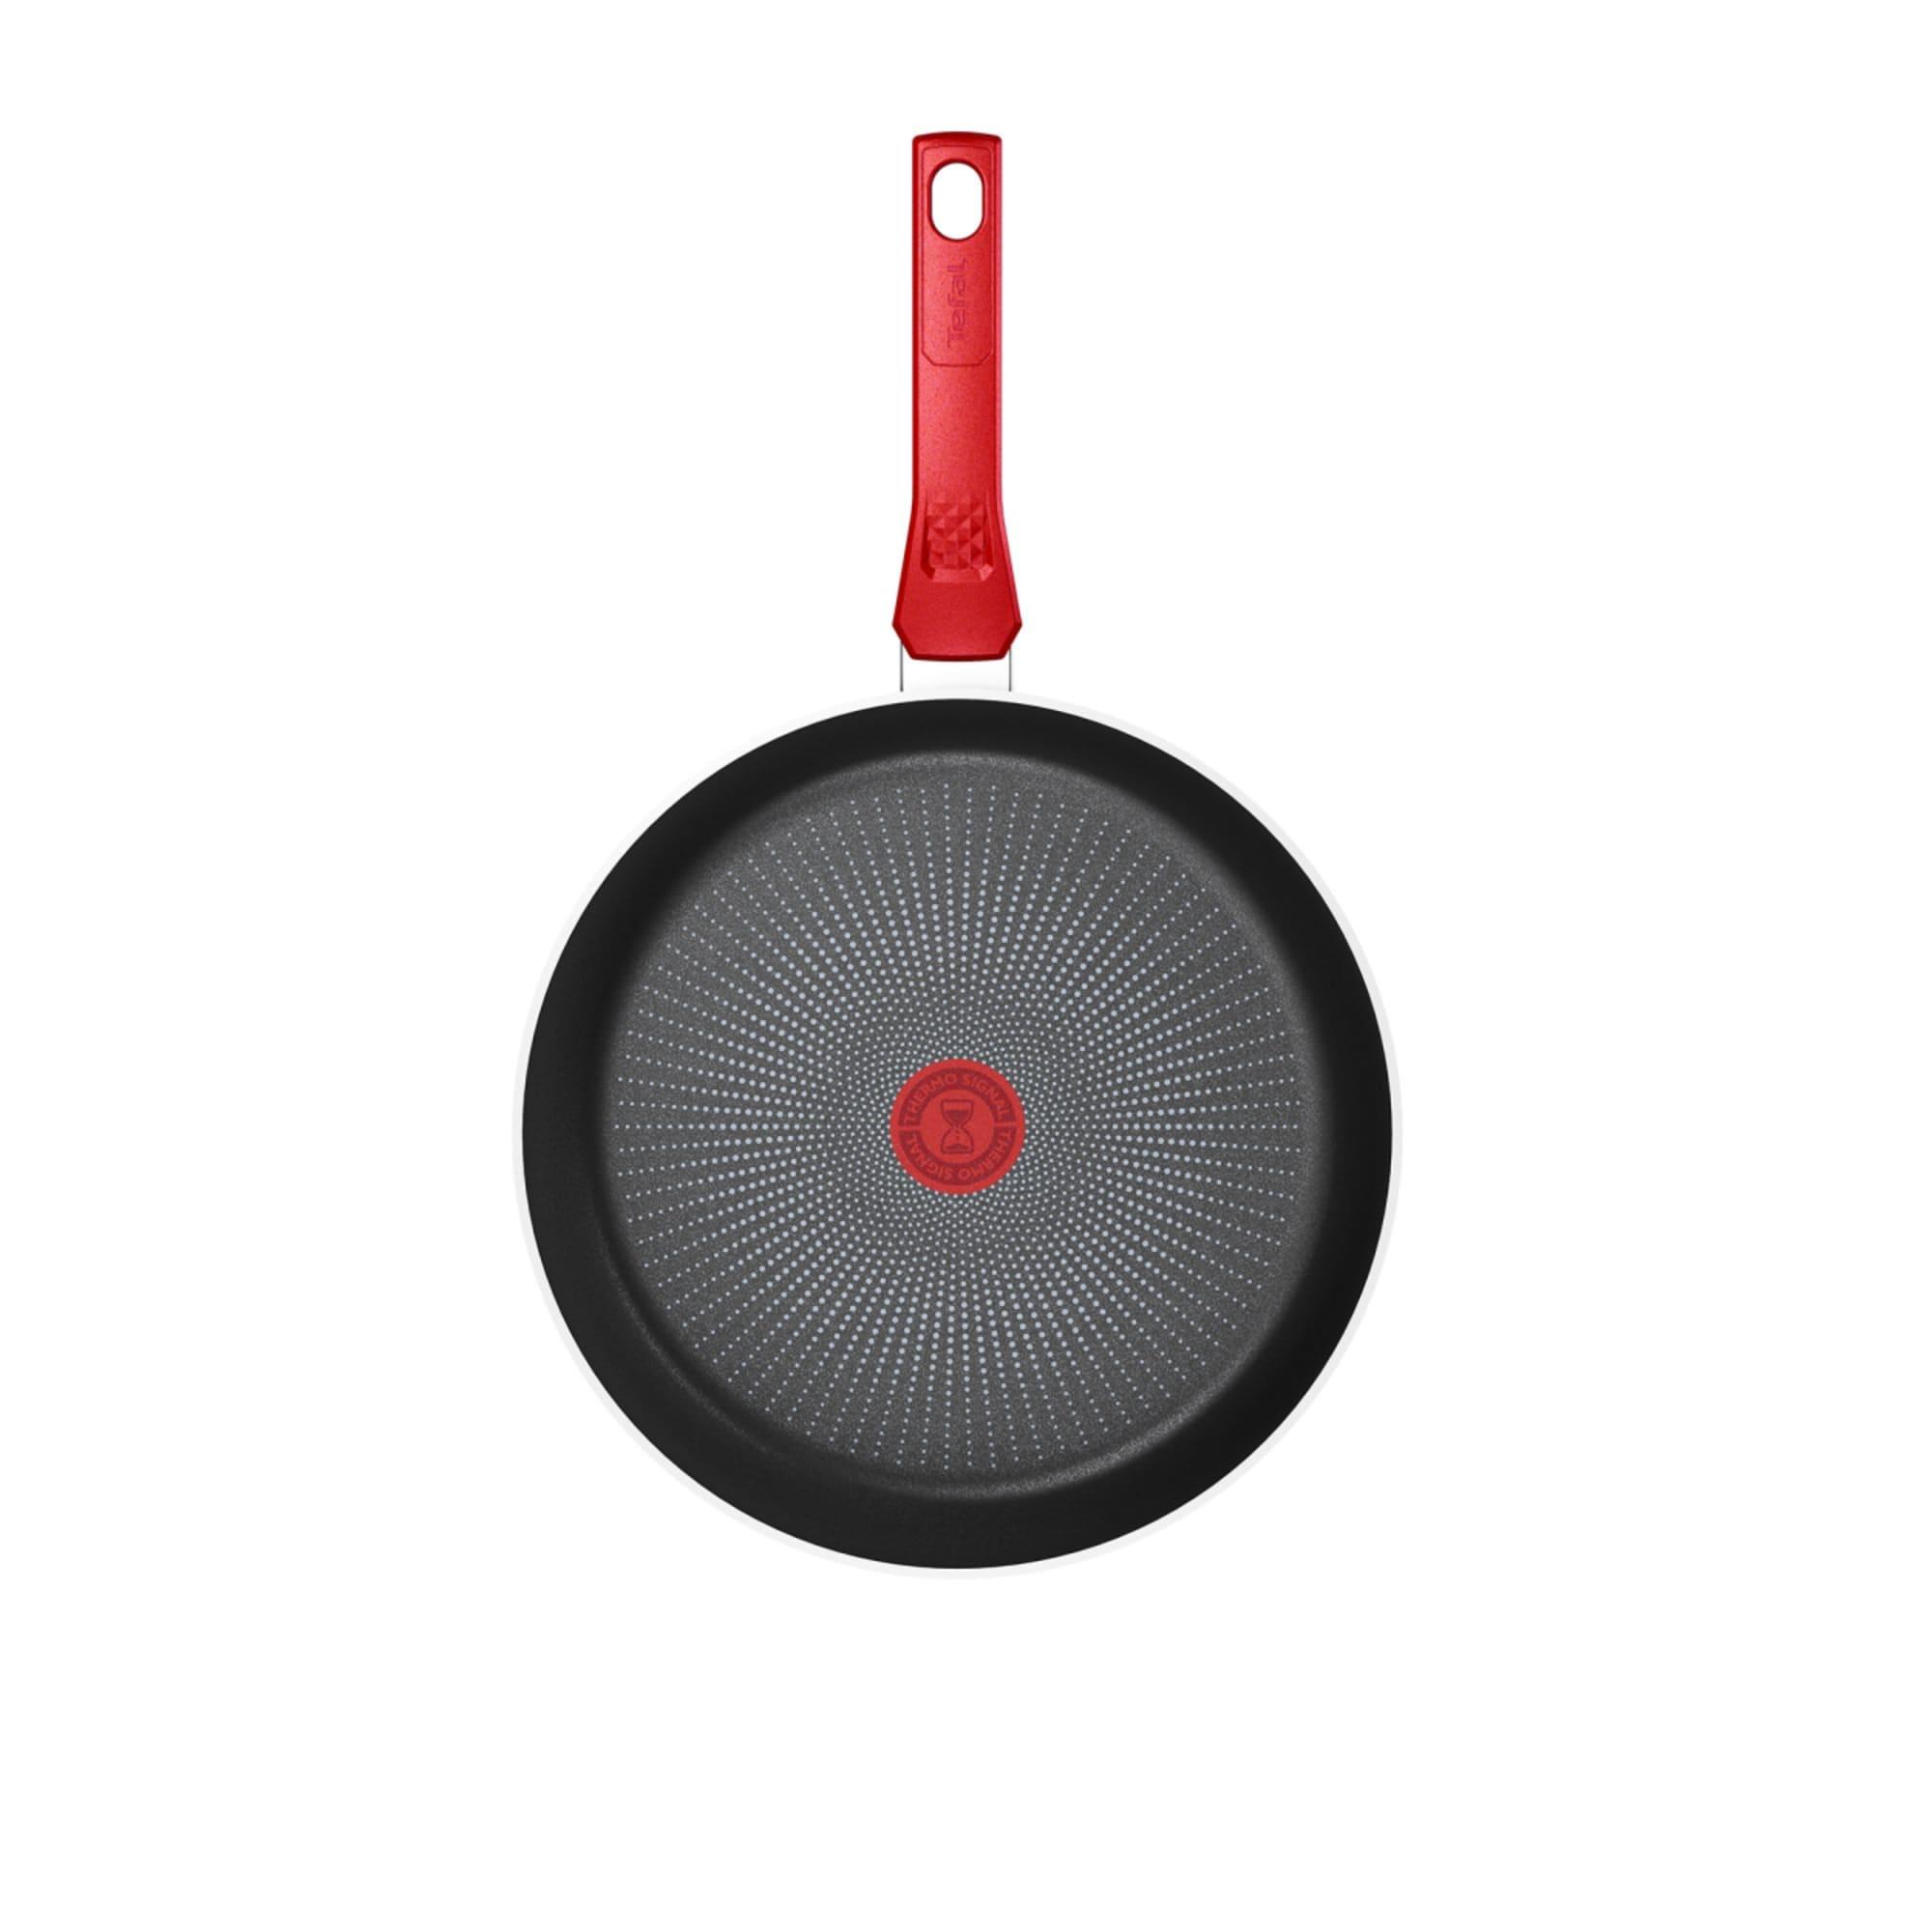 Tefal Daily Expert Frypan 28cm Red Image 3